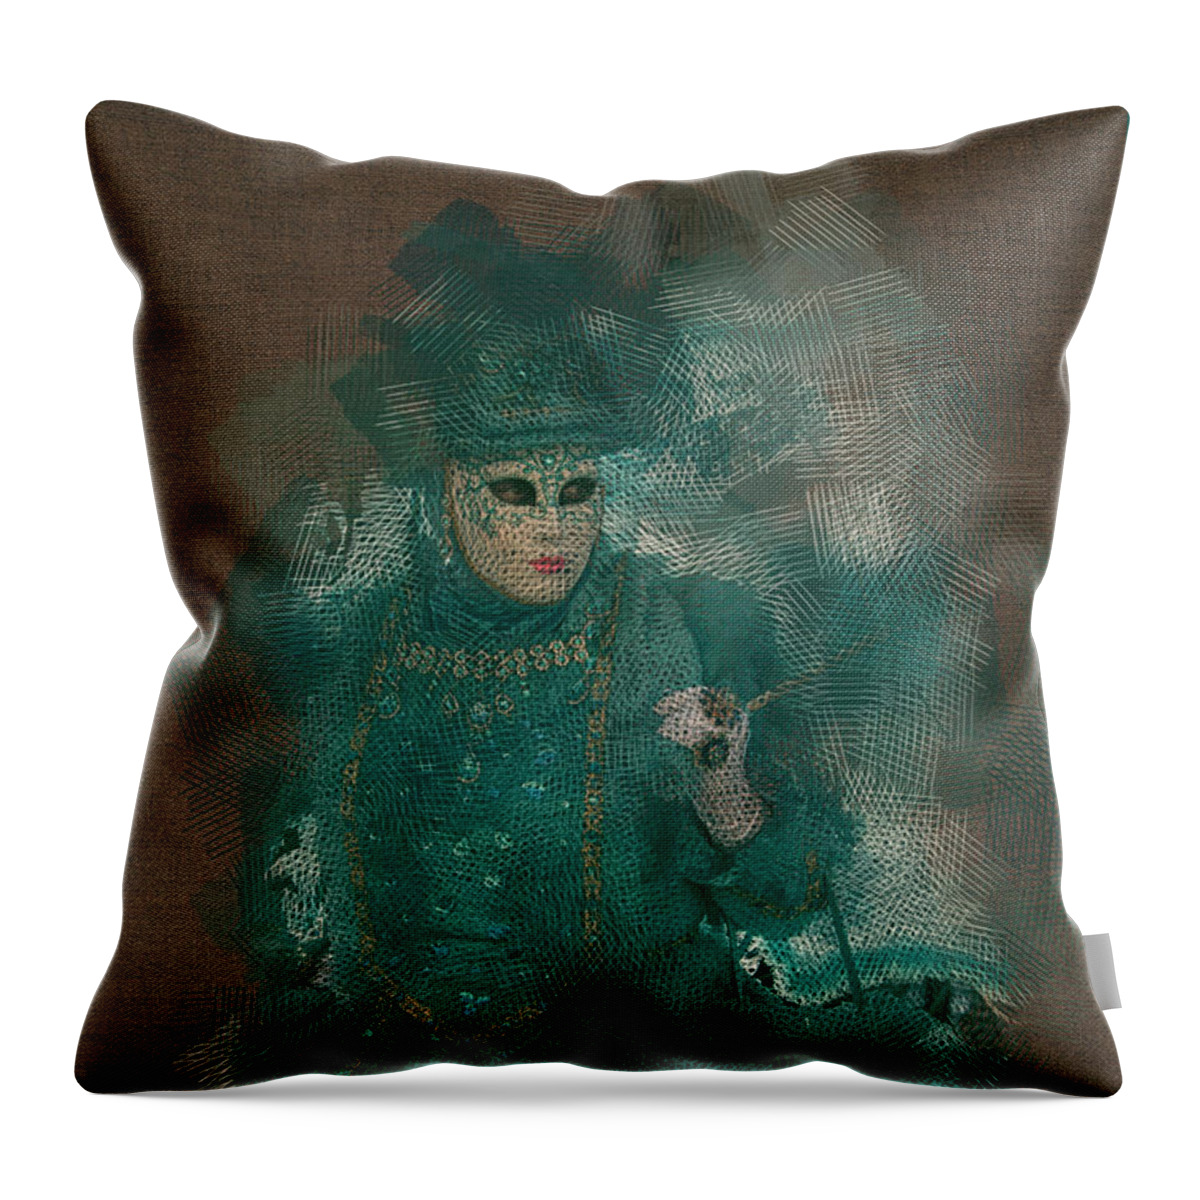 2016 Throw Pillow featuring the photograph Turquoise Lady Venice Carnival by Jack Torcello